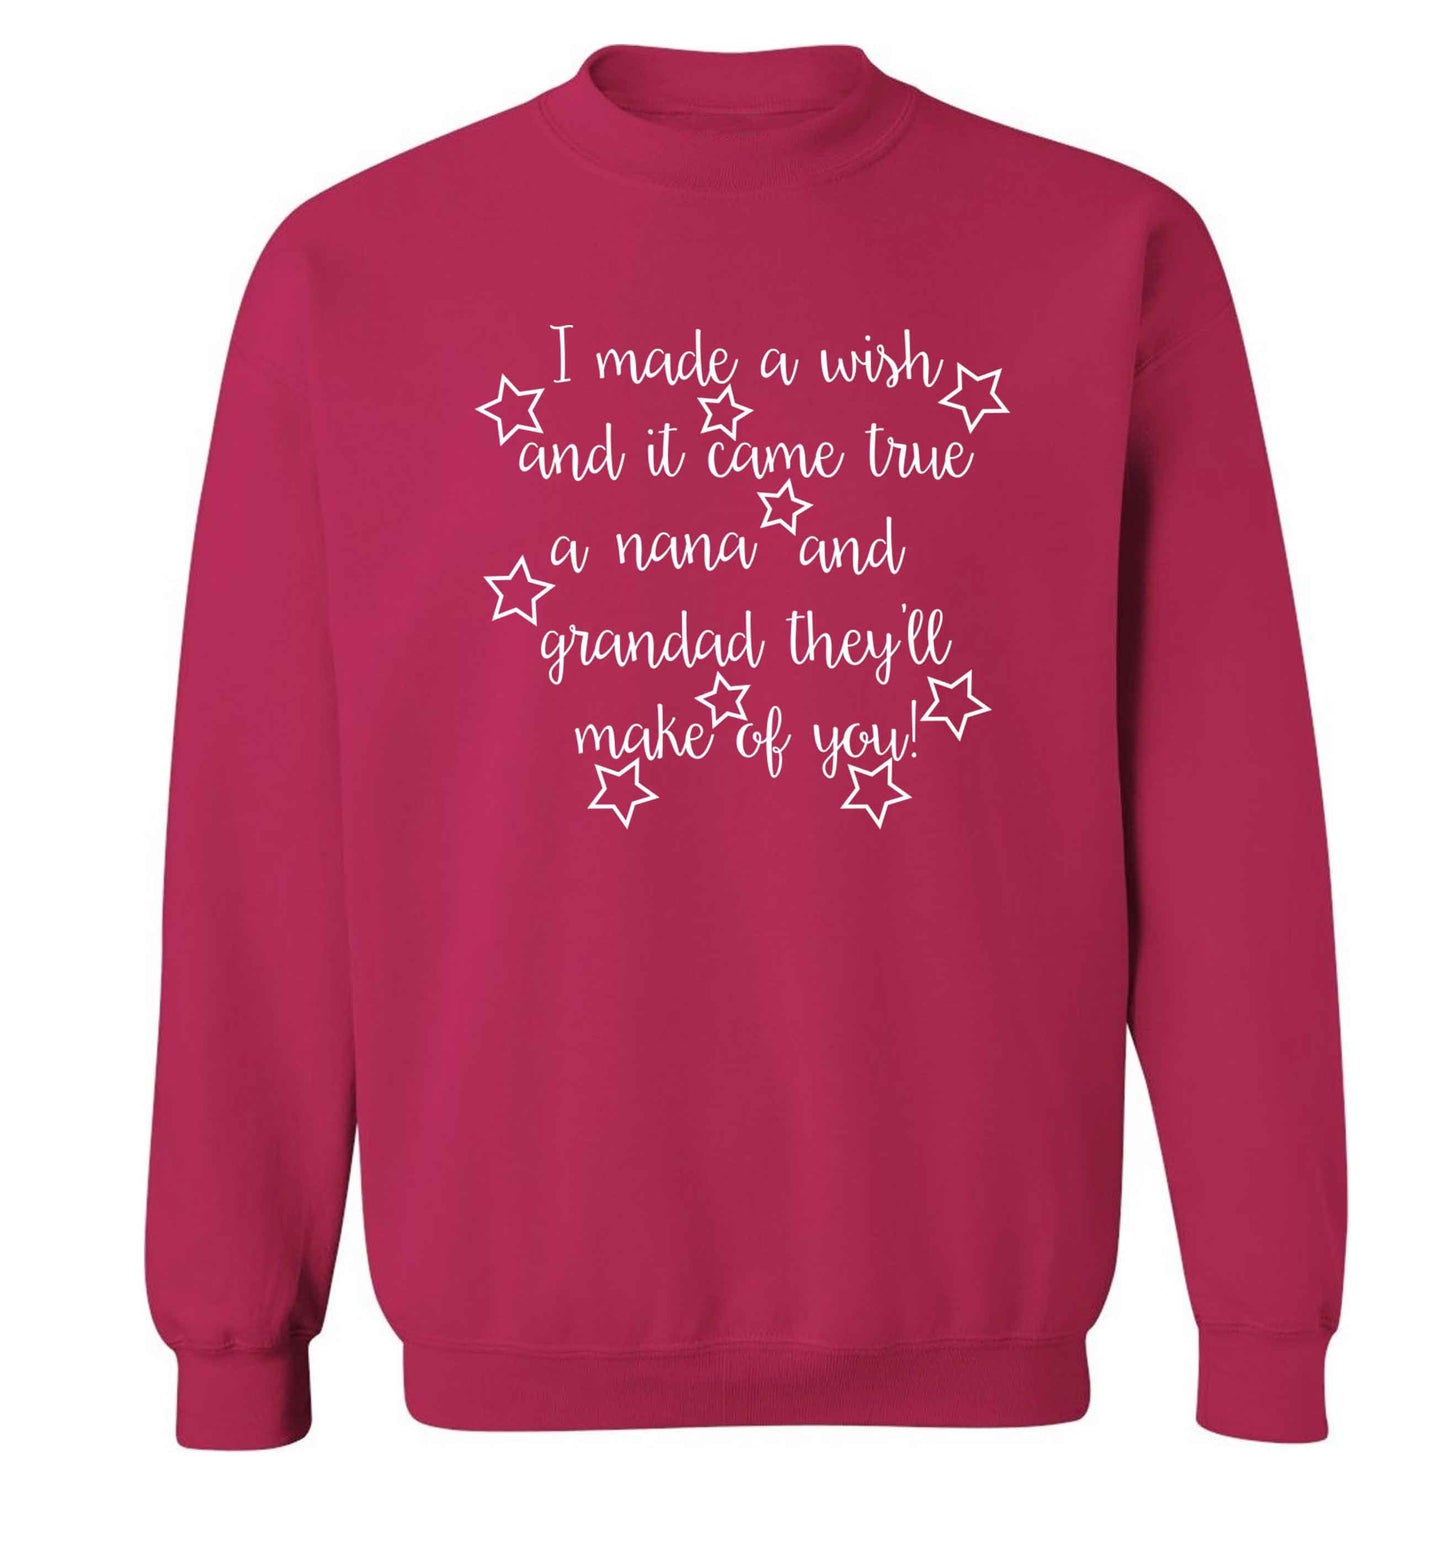 I made a wish and it came true a nana and grandad they'll make of you! Adult's unisex pink Sweater 2XL